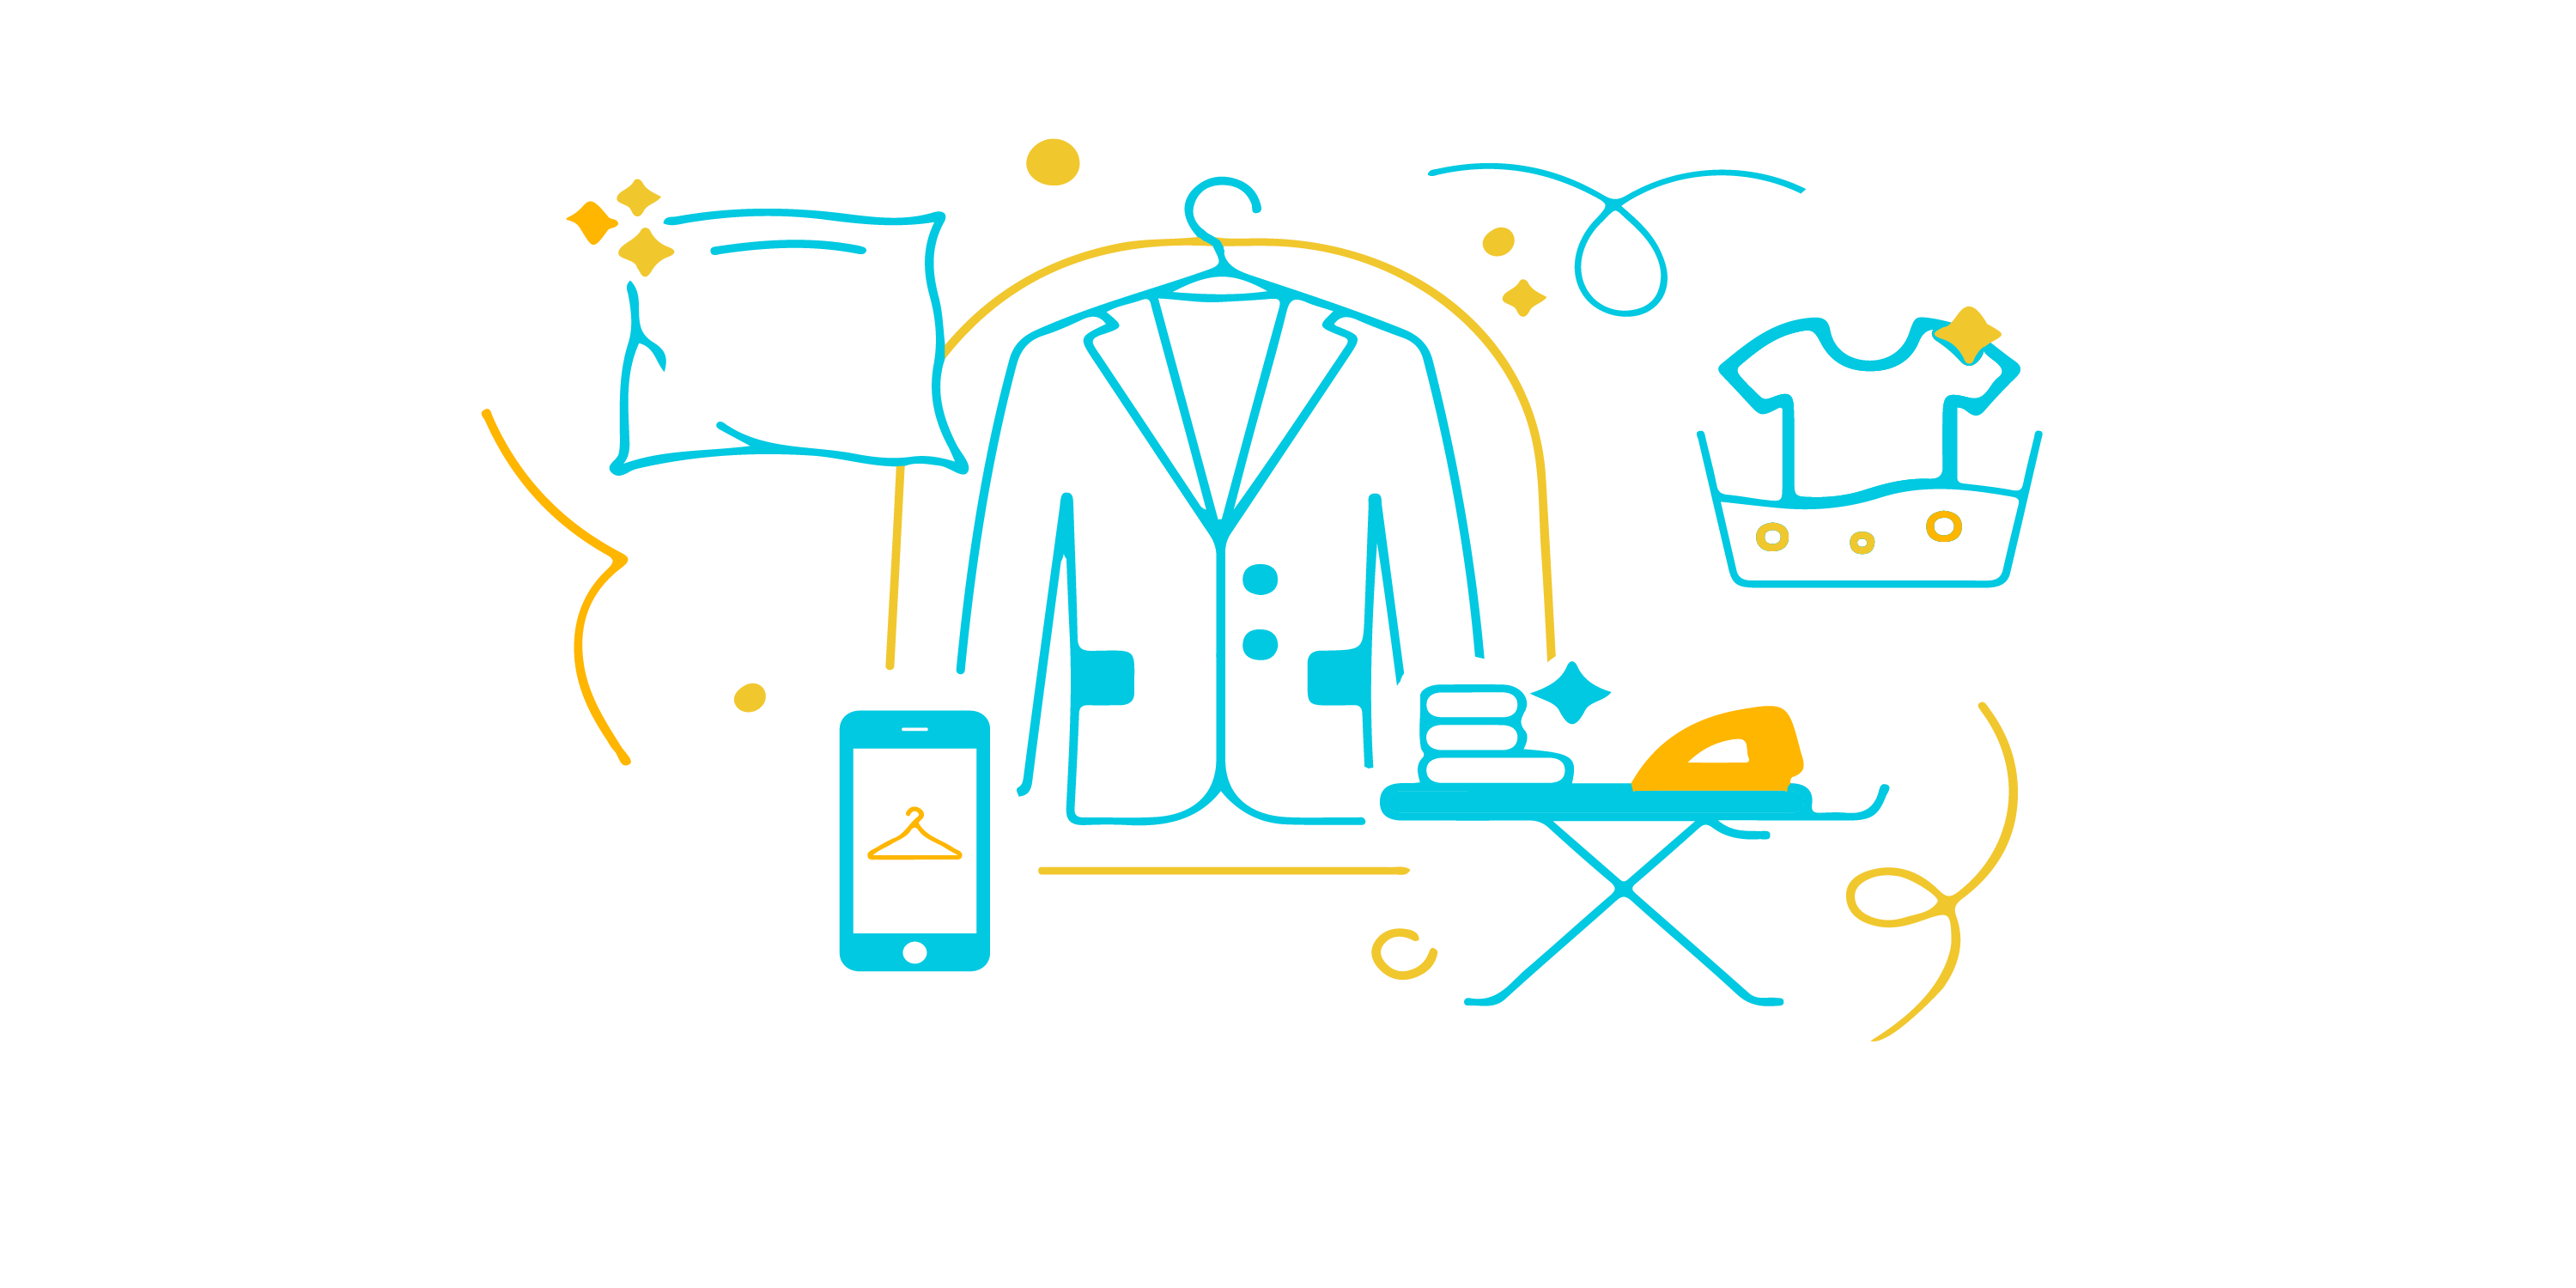 Laundr Dry Cleaning Graphic